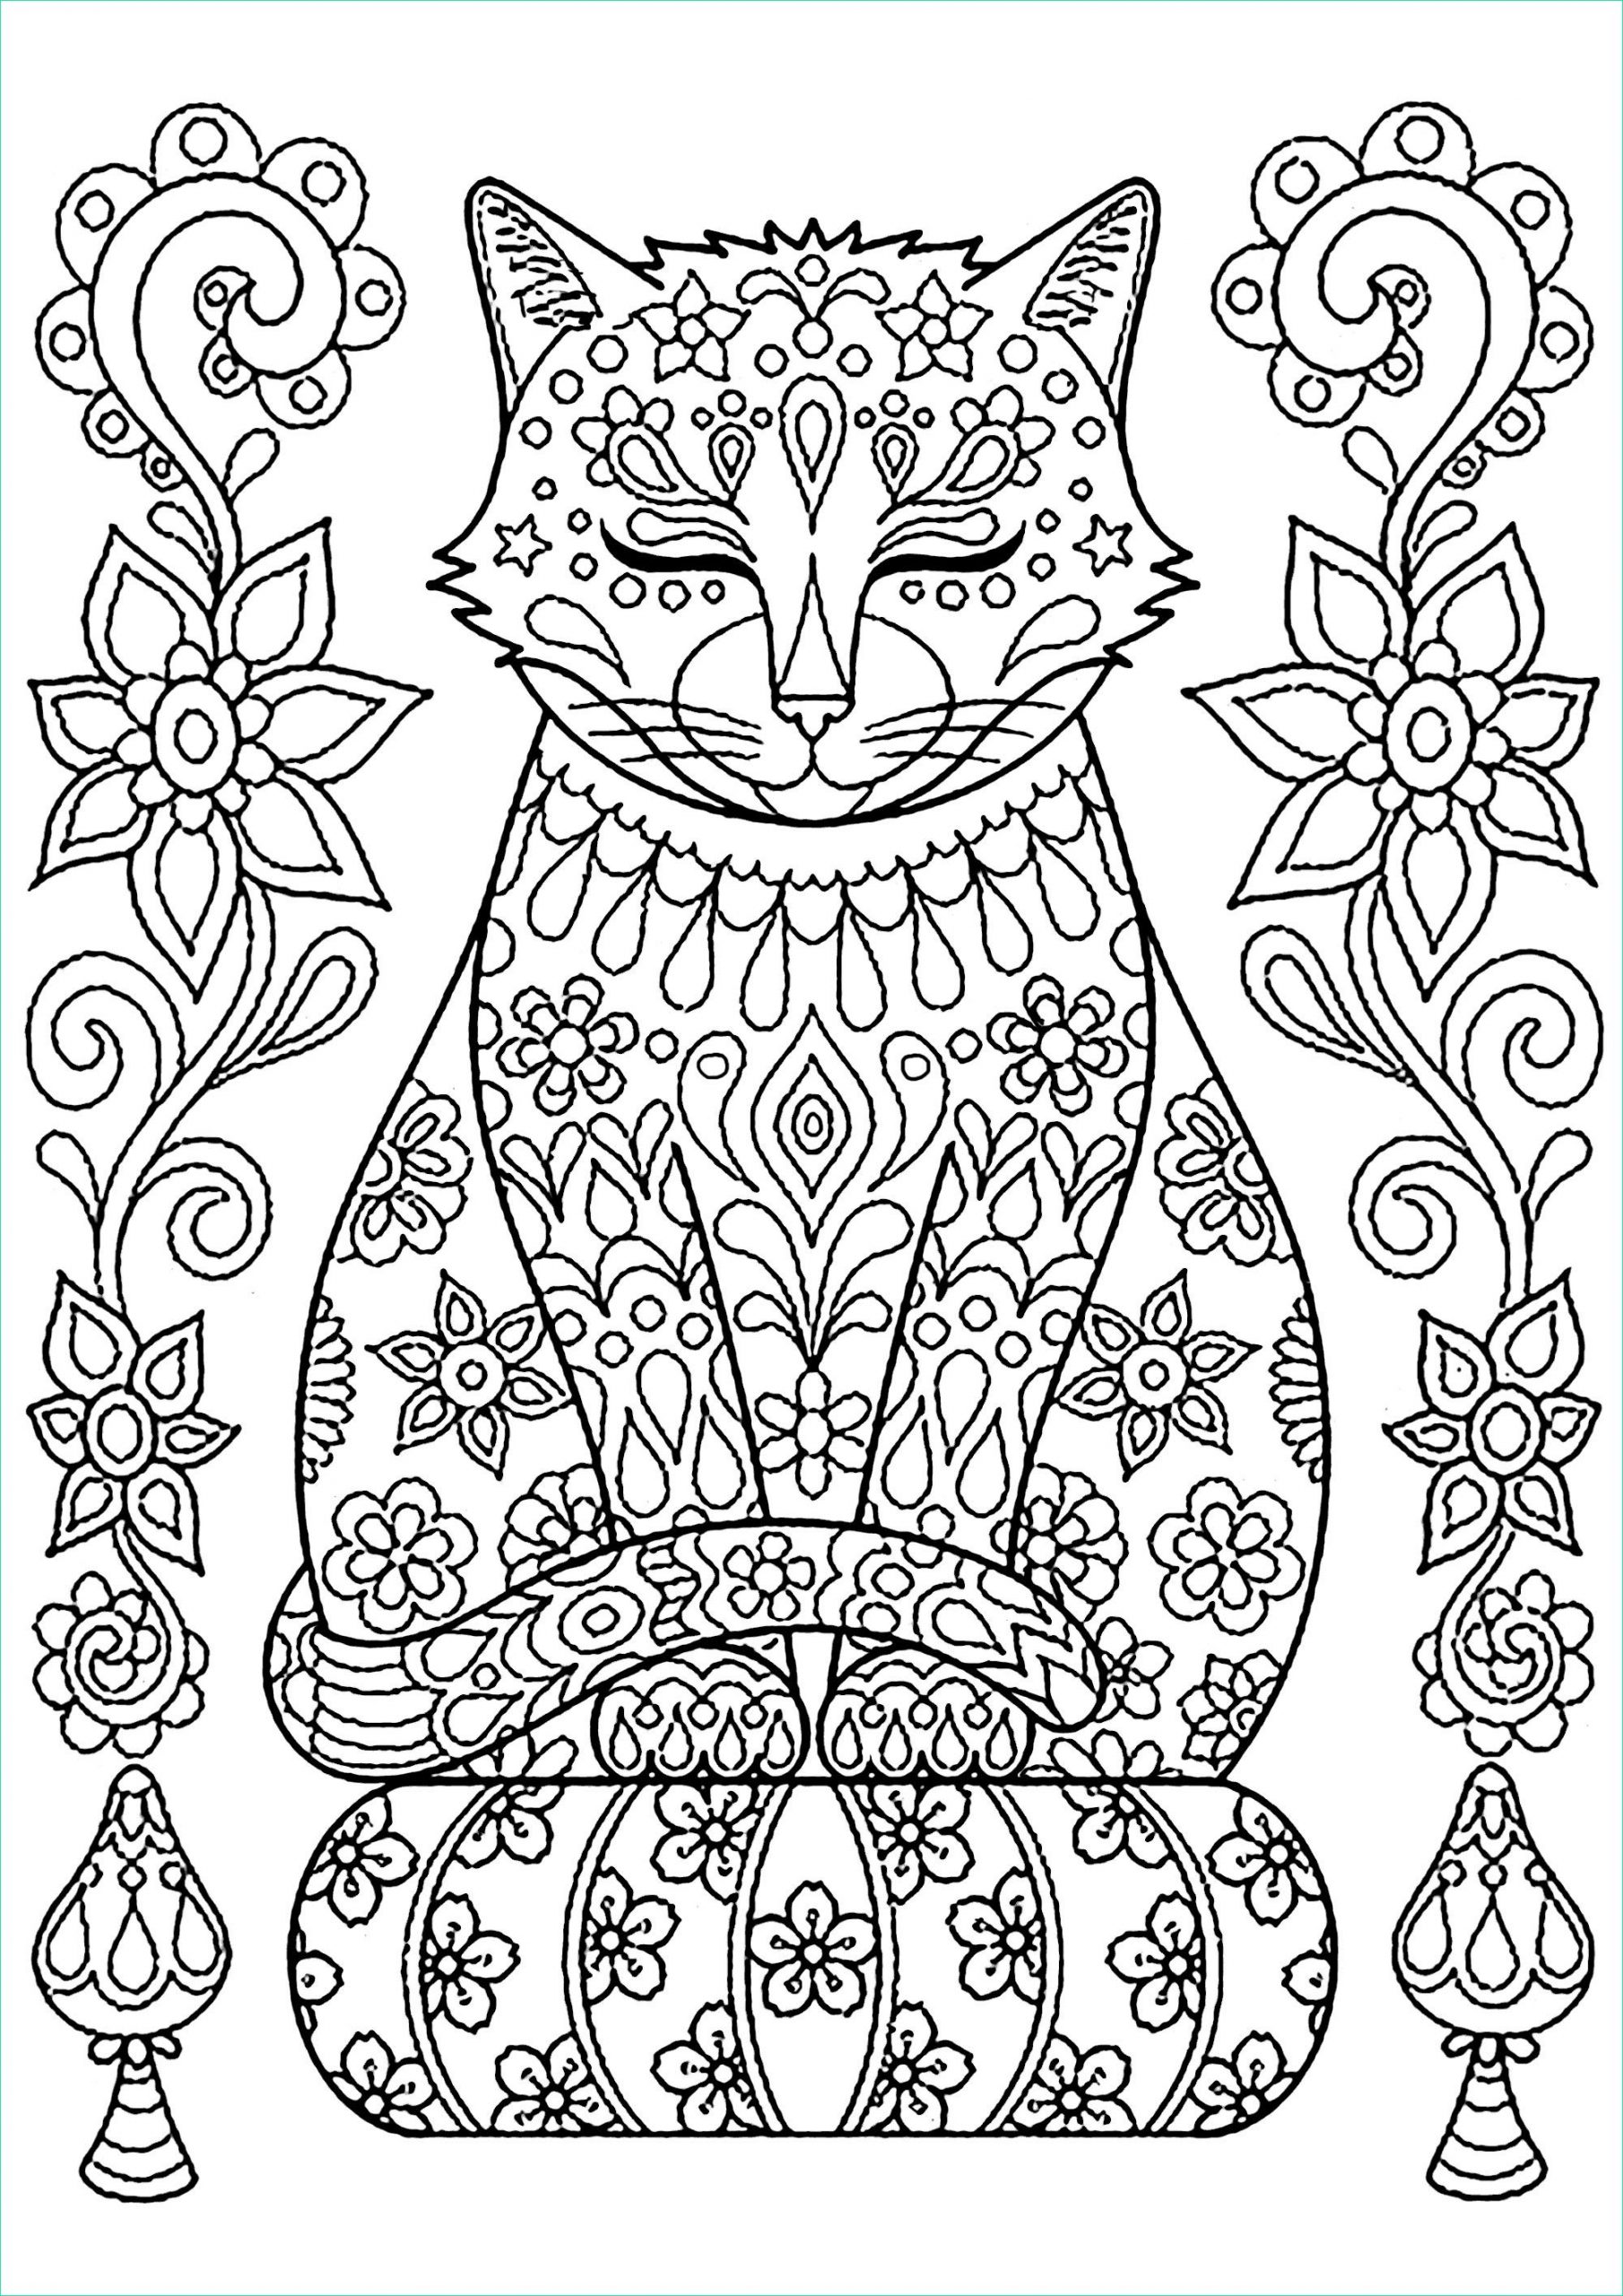 image=cats coloring cute cat on pillow with flowers 1